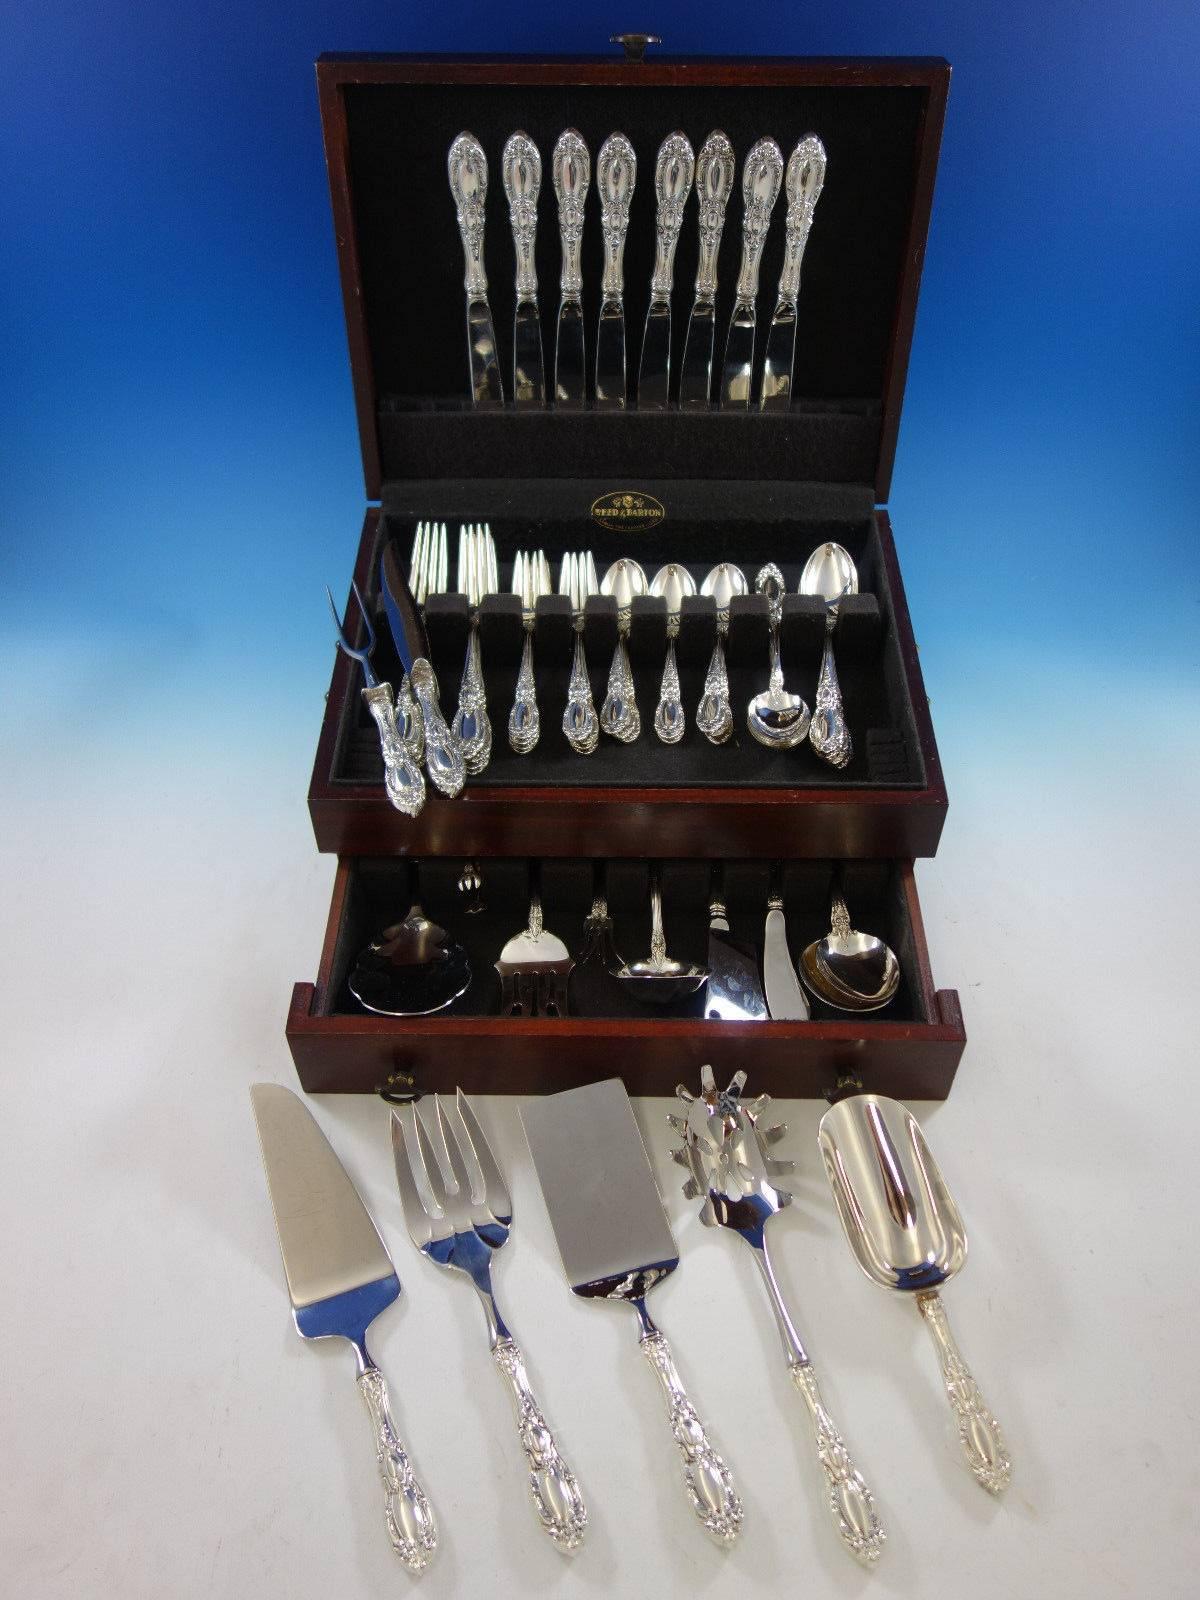 Dinner size king Richard by Towle sterling silver flatware set, 57 pieces. This set includes: 

Eight dinner size knives, 9 5/8